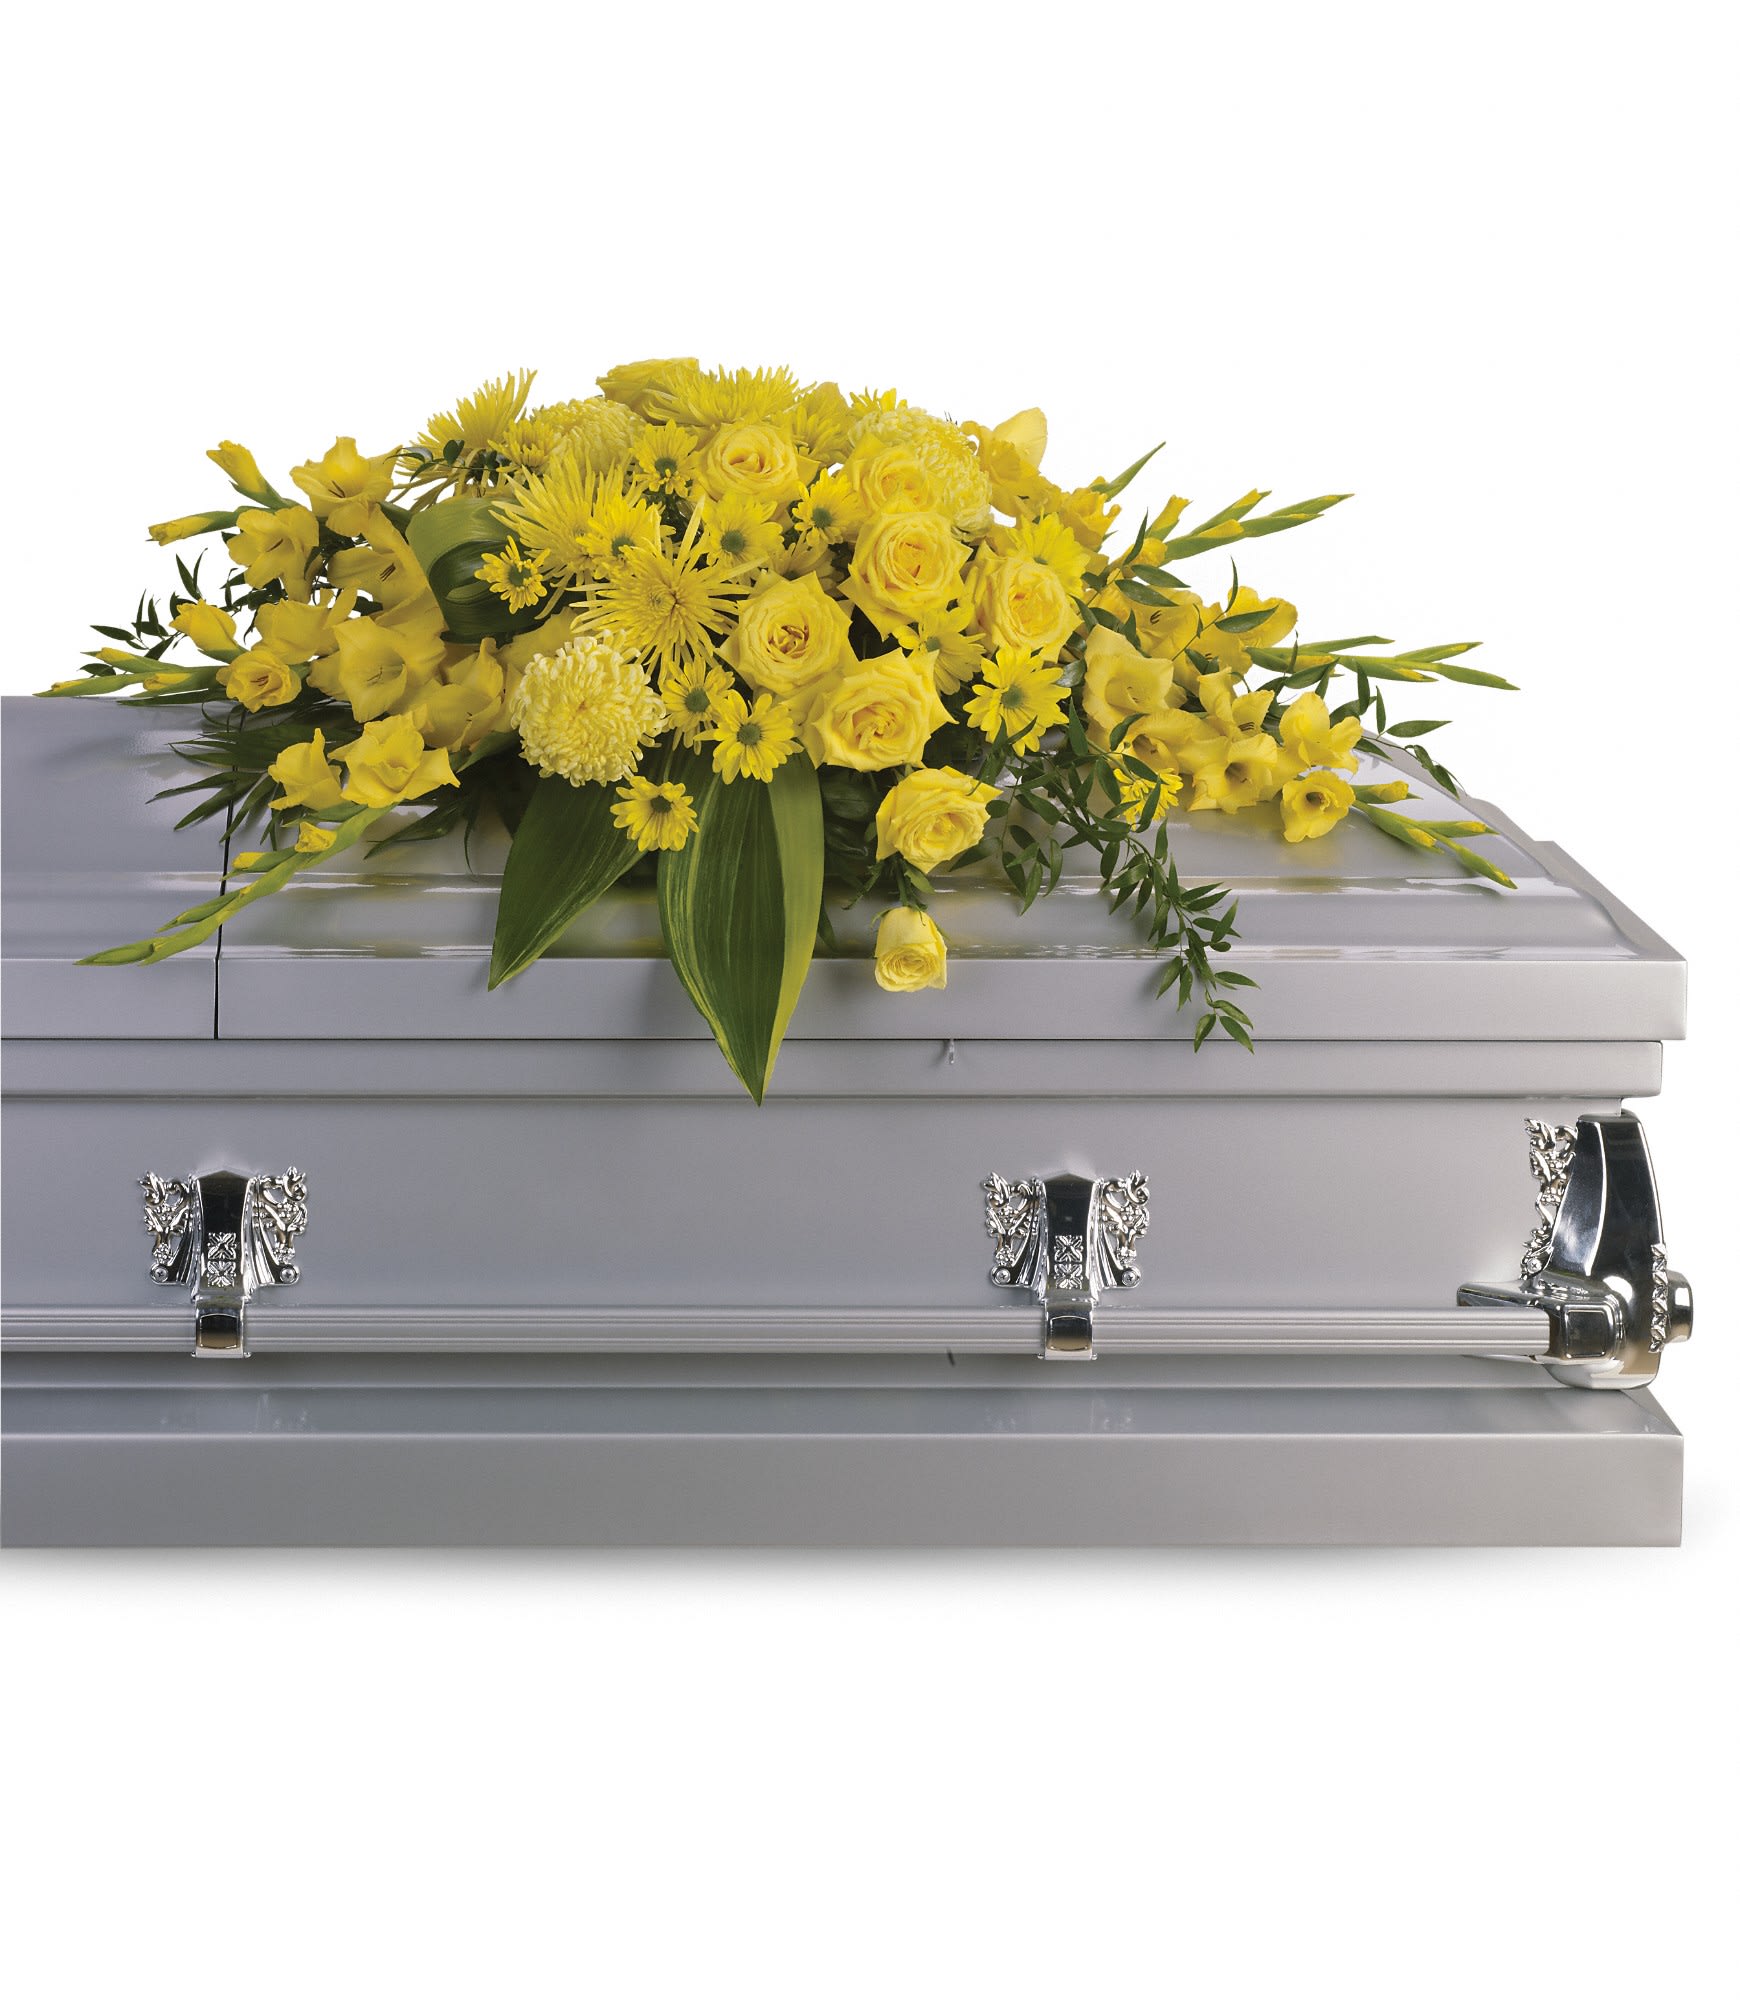 Graceful Grandeur Casket Spray  - Joyous times and golden memories are recalled with this lovely half-couch casket spray that consoles the bereaved with a sunny array of beautiful blooms. 